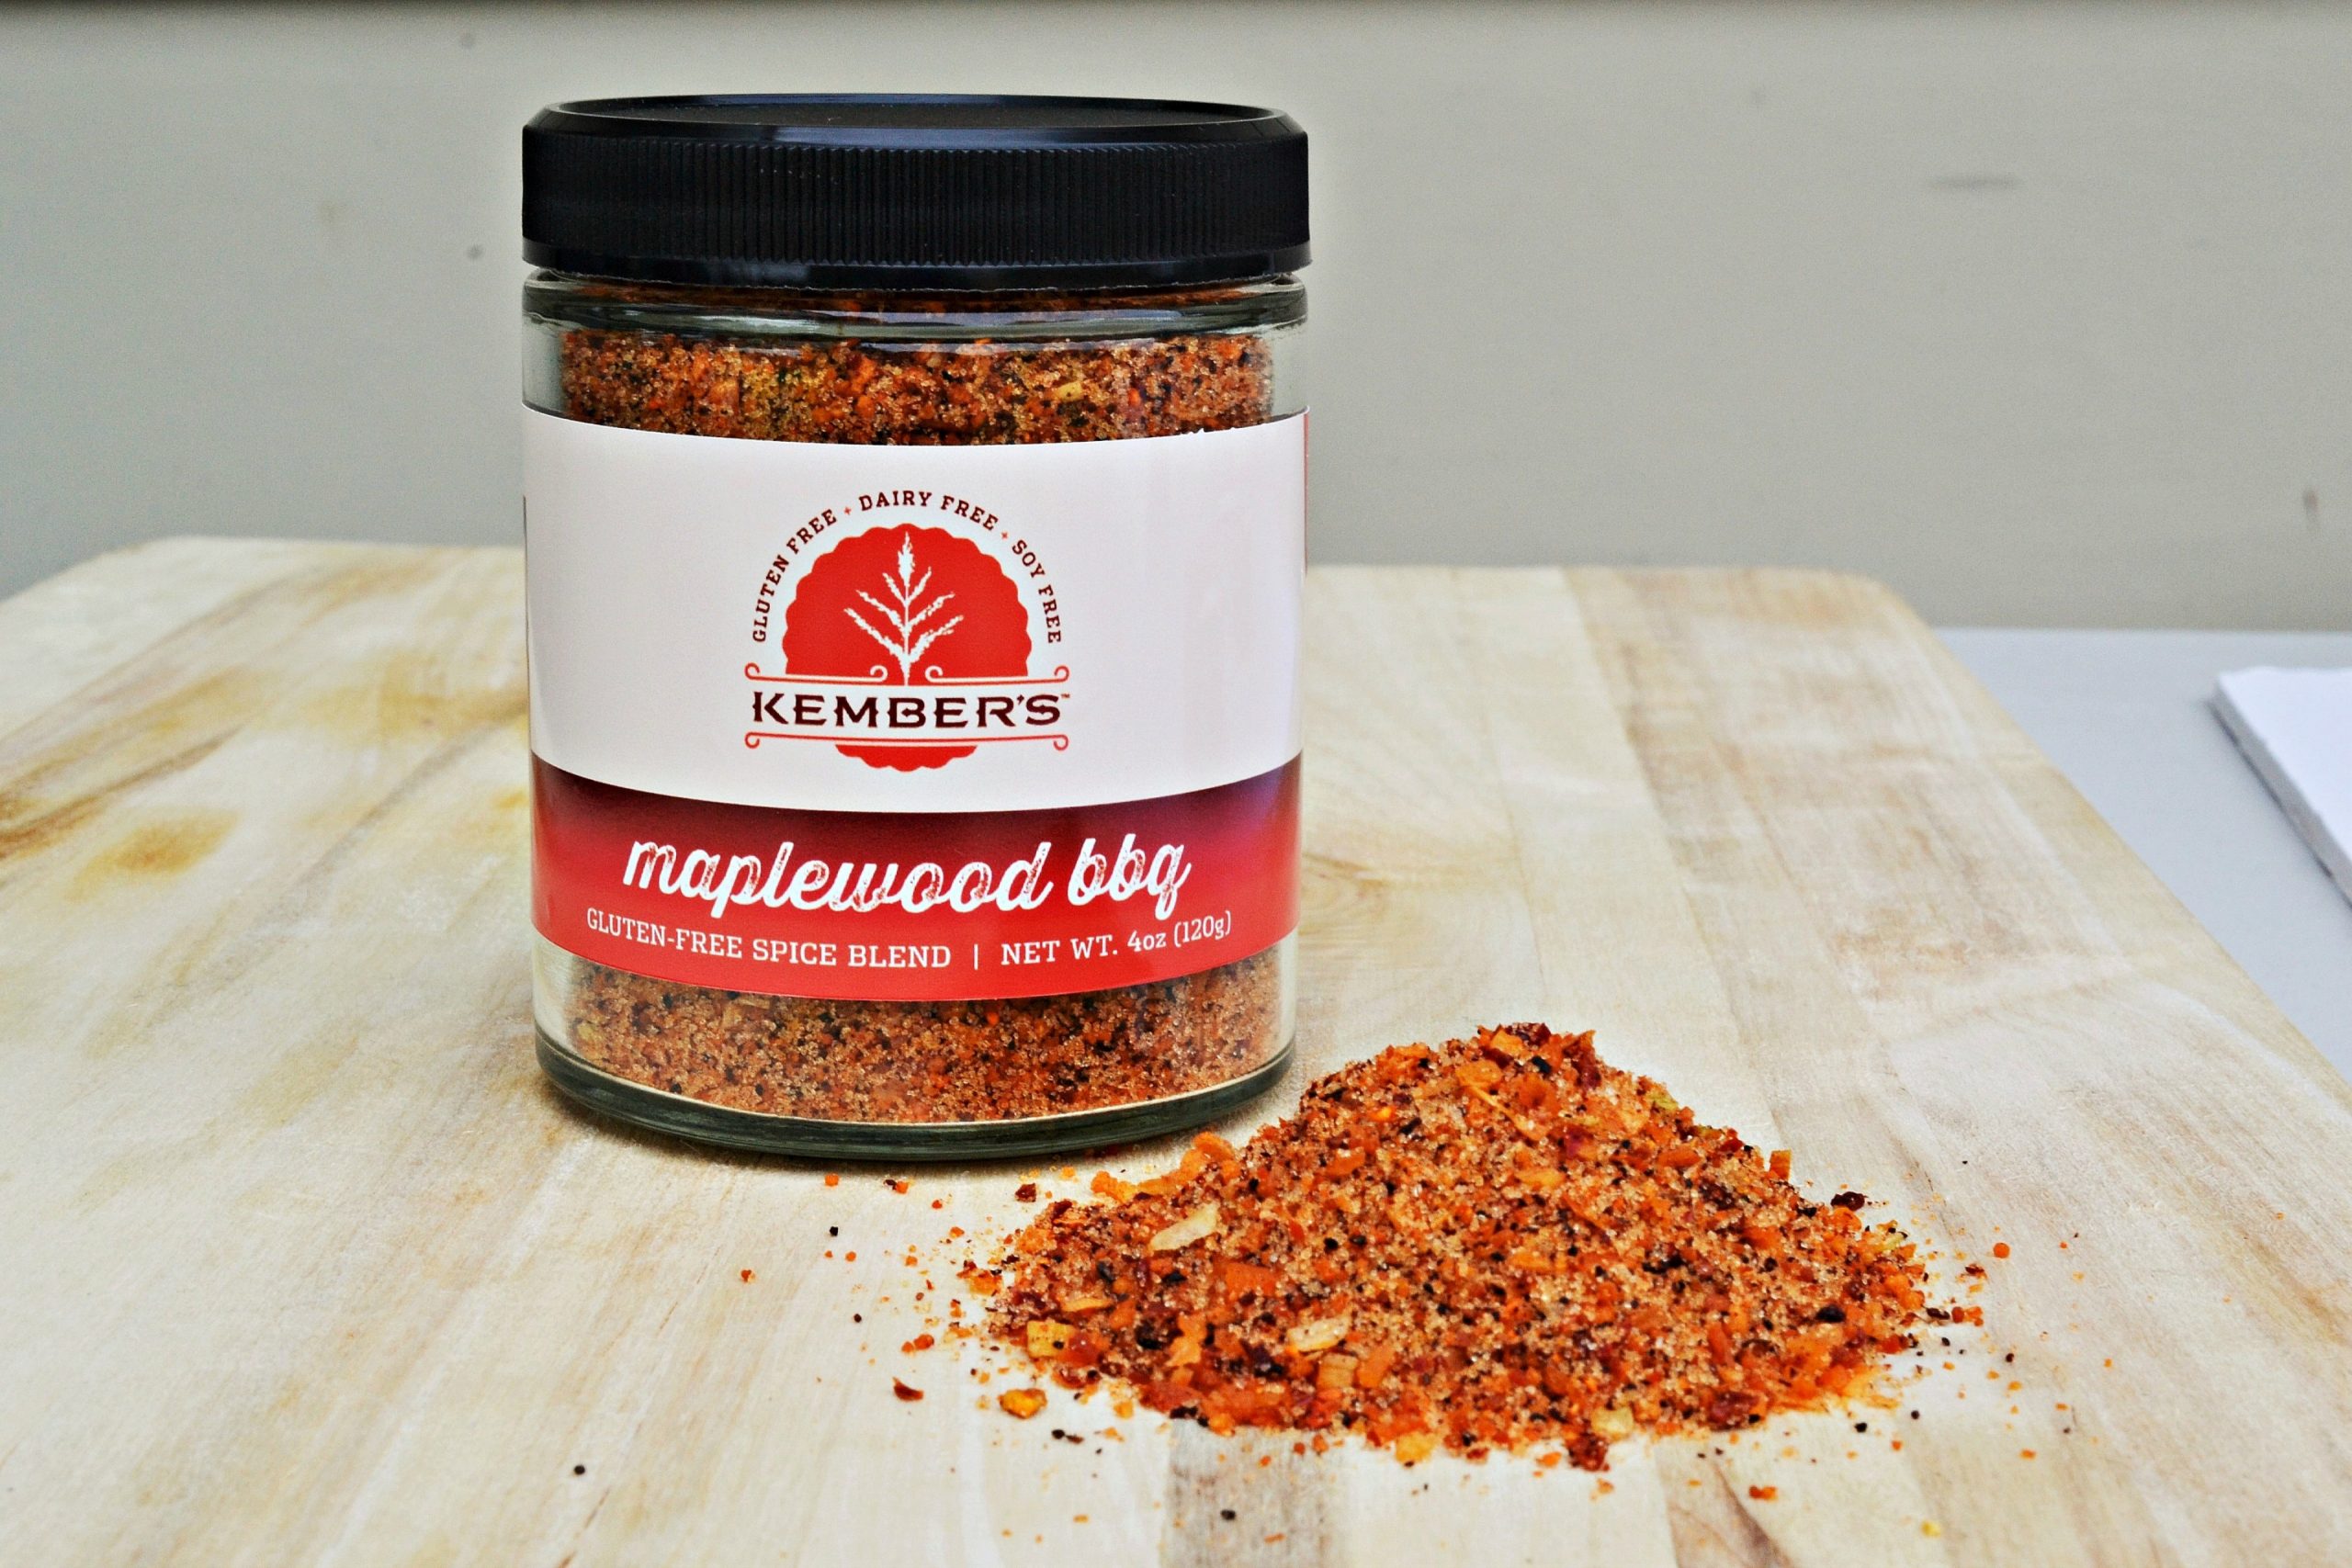 Gluten Free spices are hard to find. This gem takes brings ...